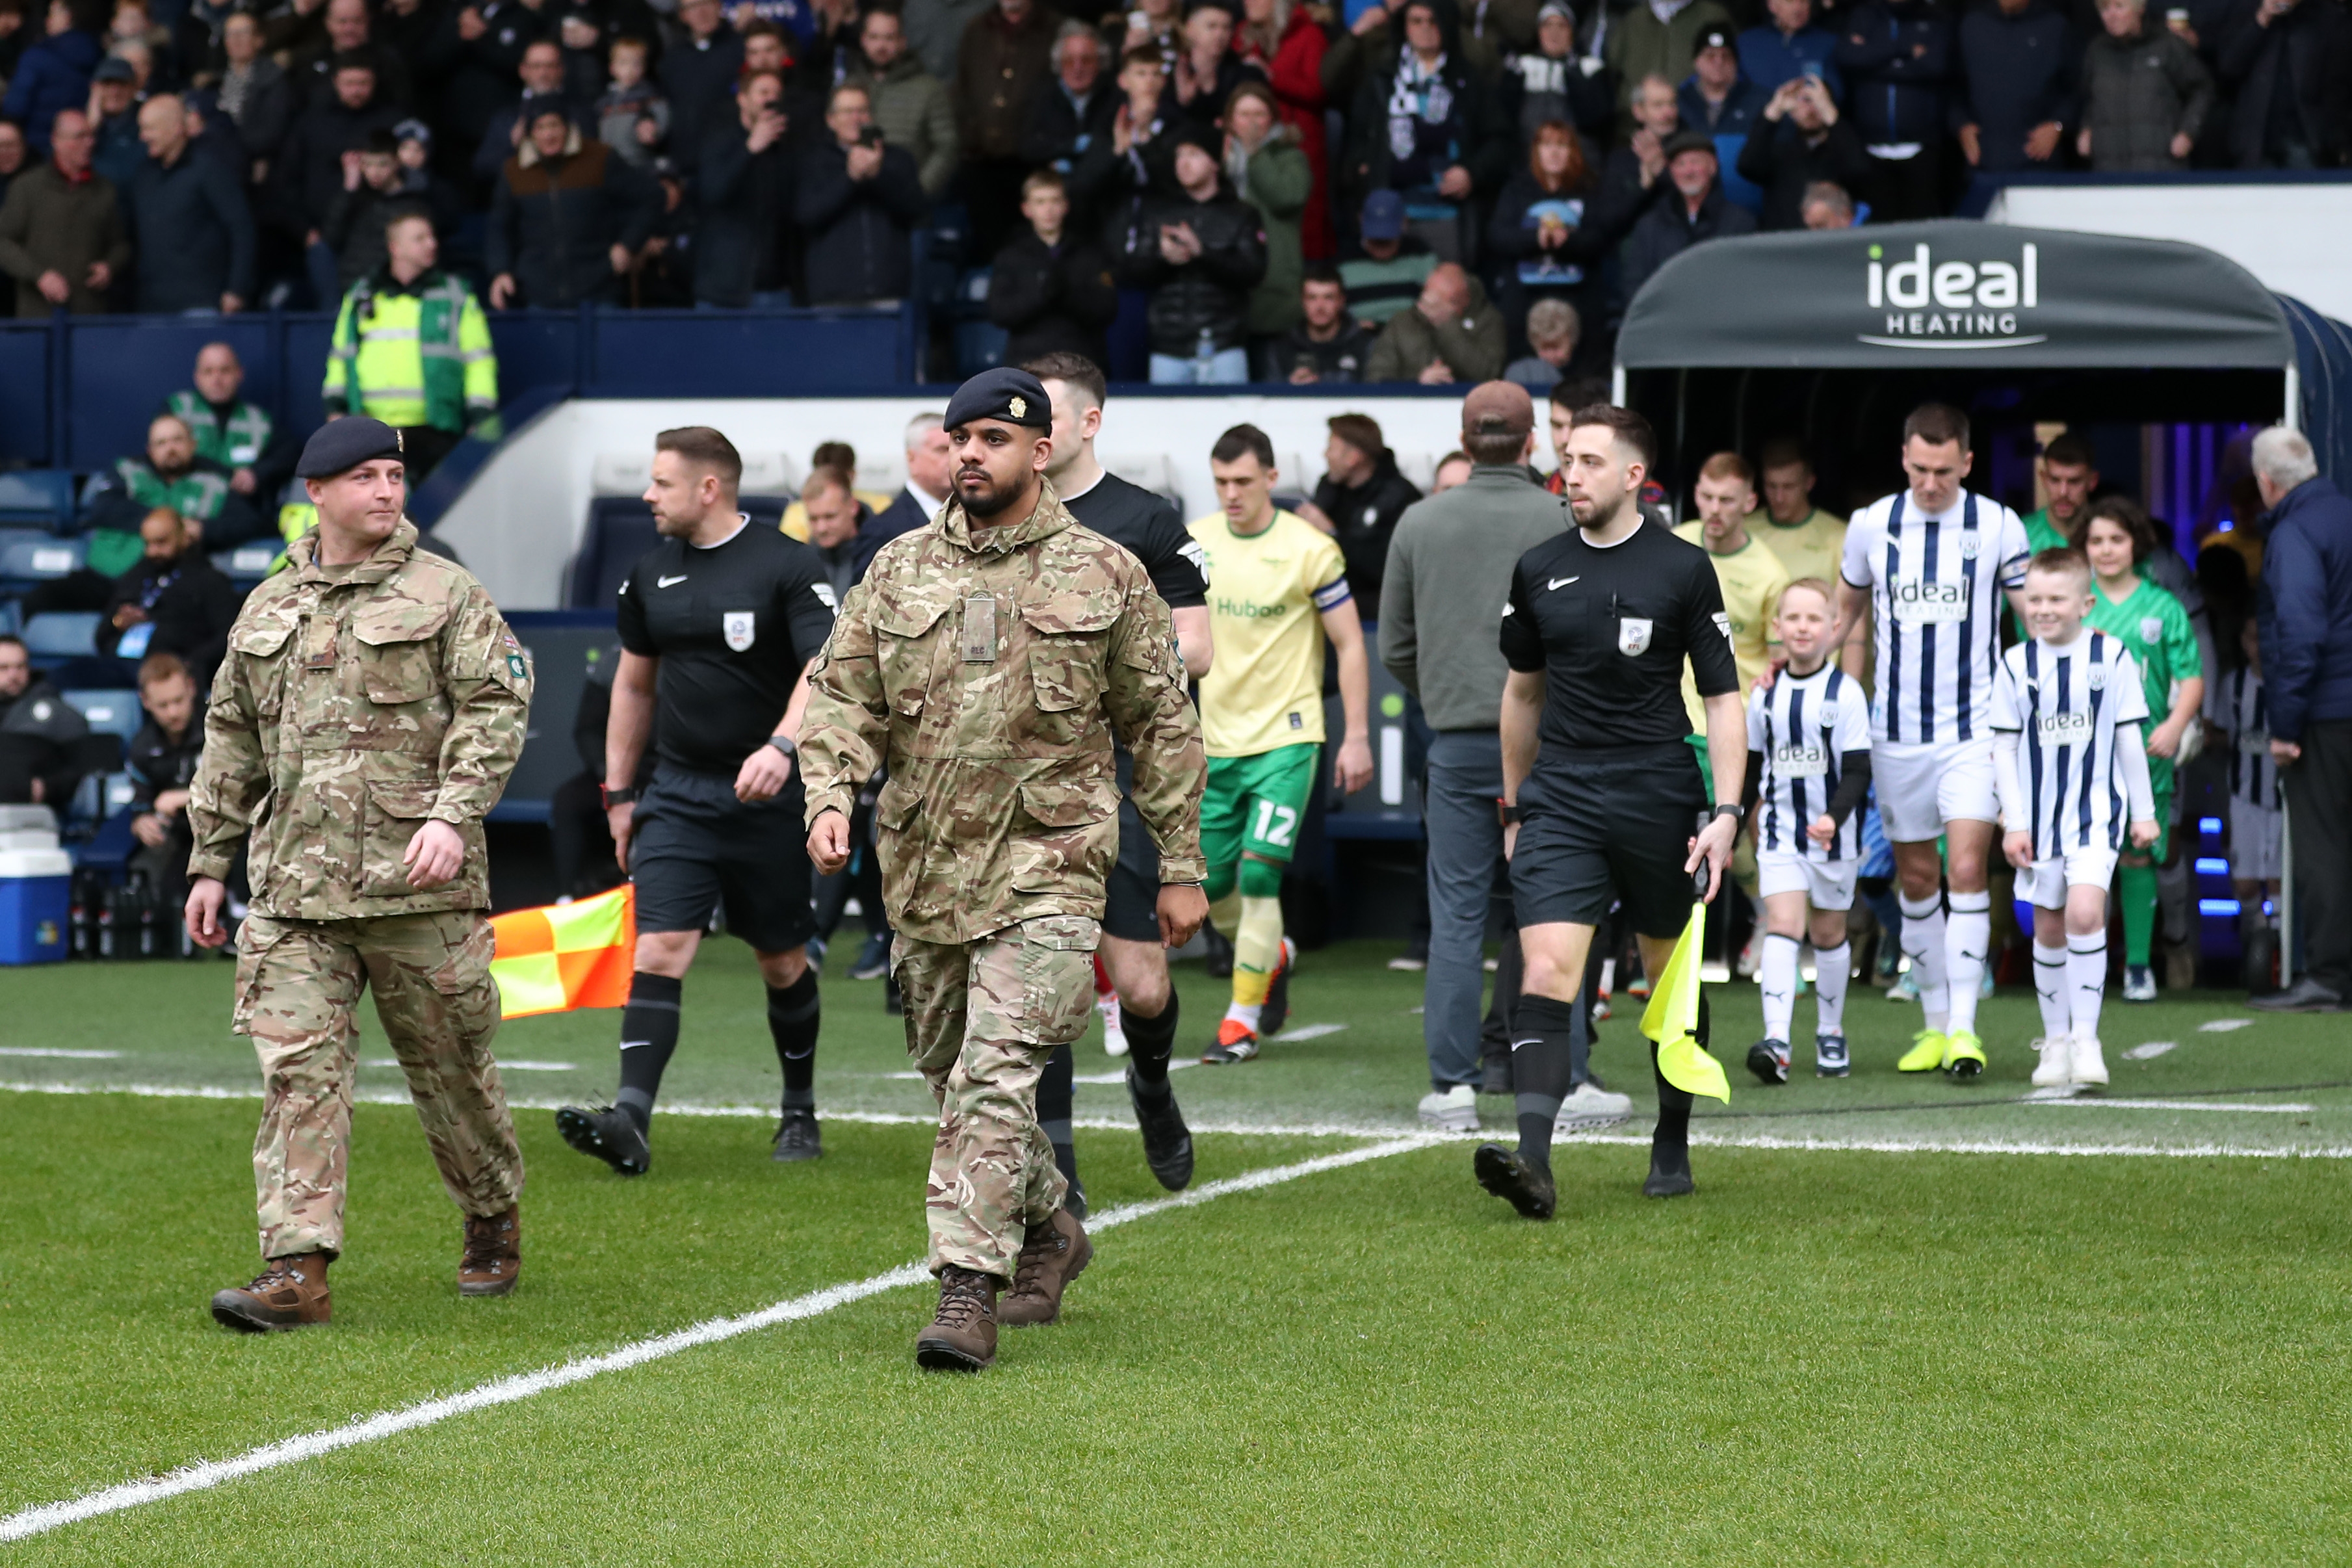 Albion and Bristol City are led out onto the pitch by members of the military 